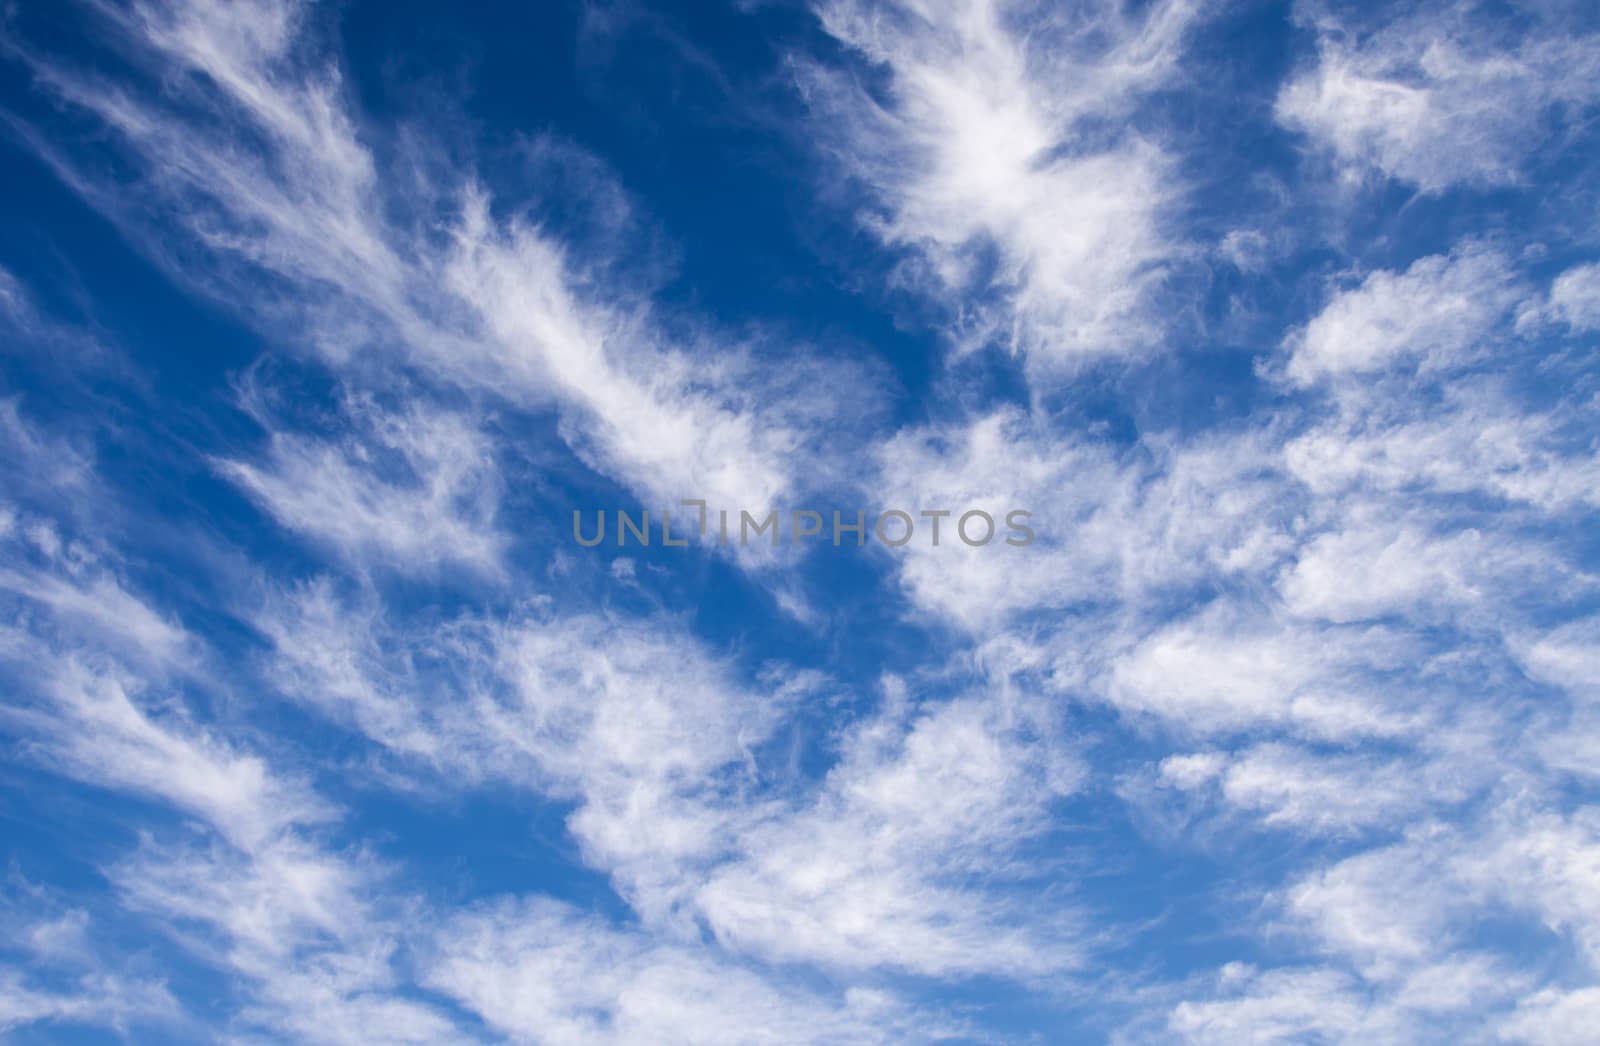 Feathery white Cirrus clouds in a blue sky